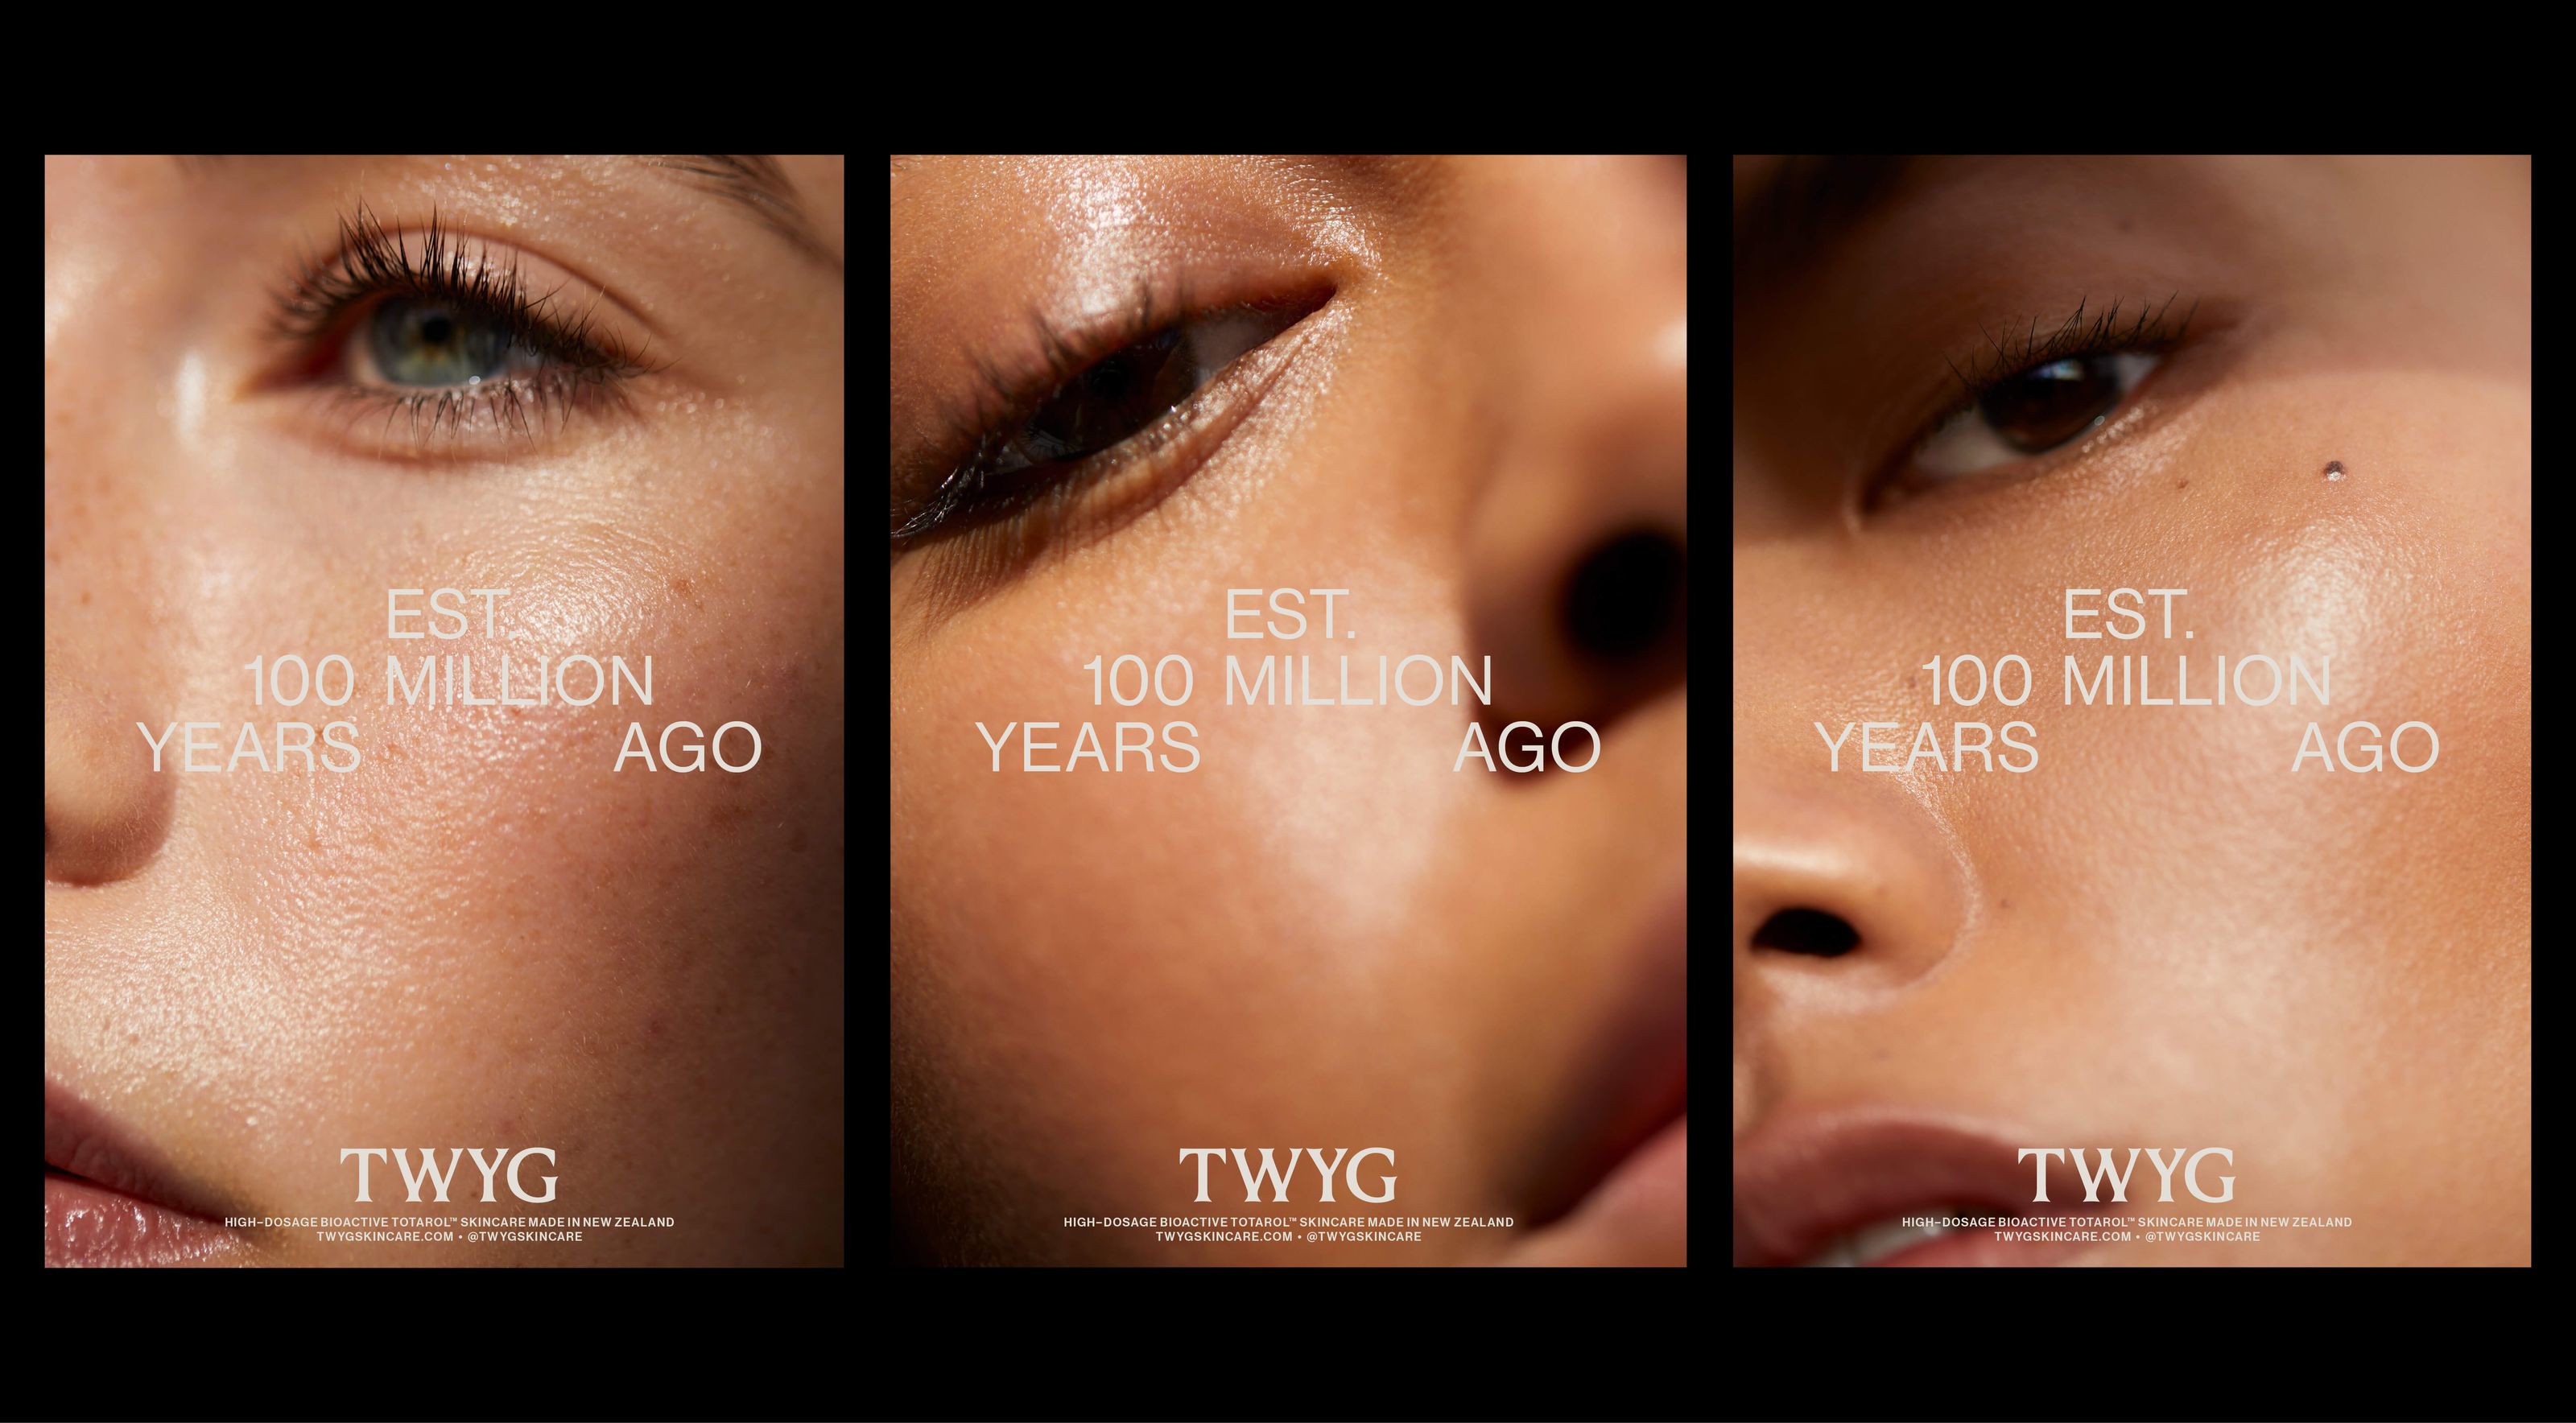 New logotype, packaging and art direction for New Zealand luxury skincare brand TWYG designed by Seachange.